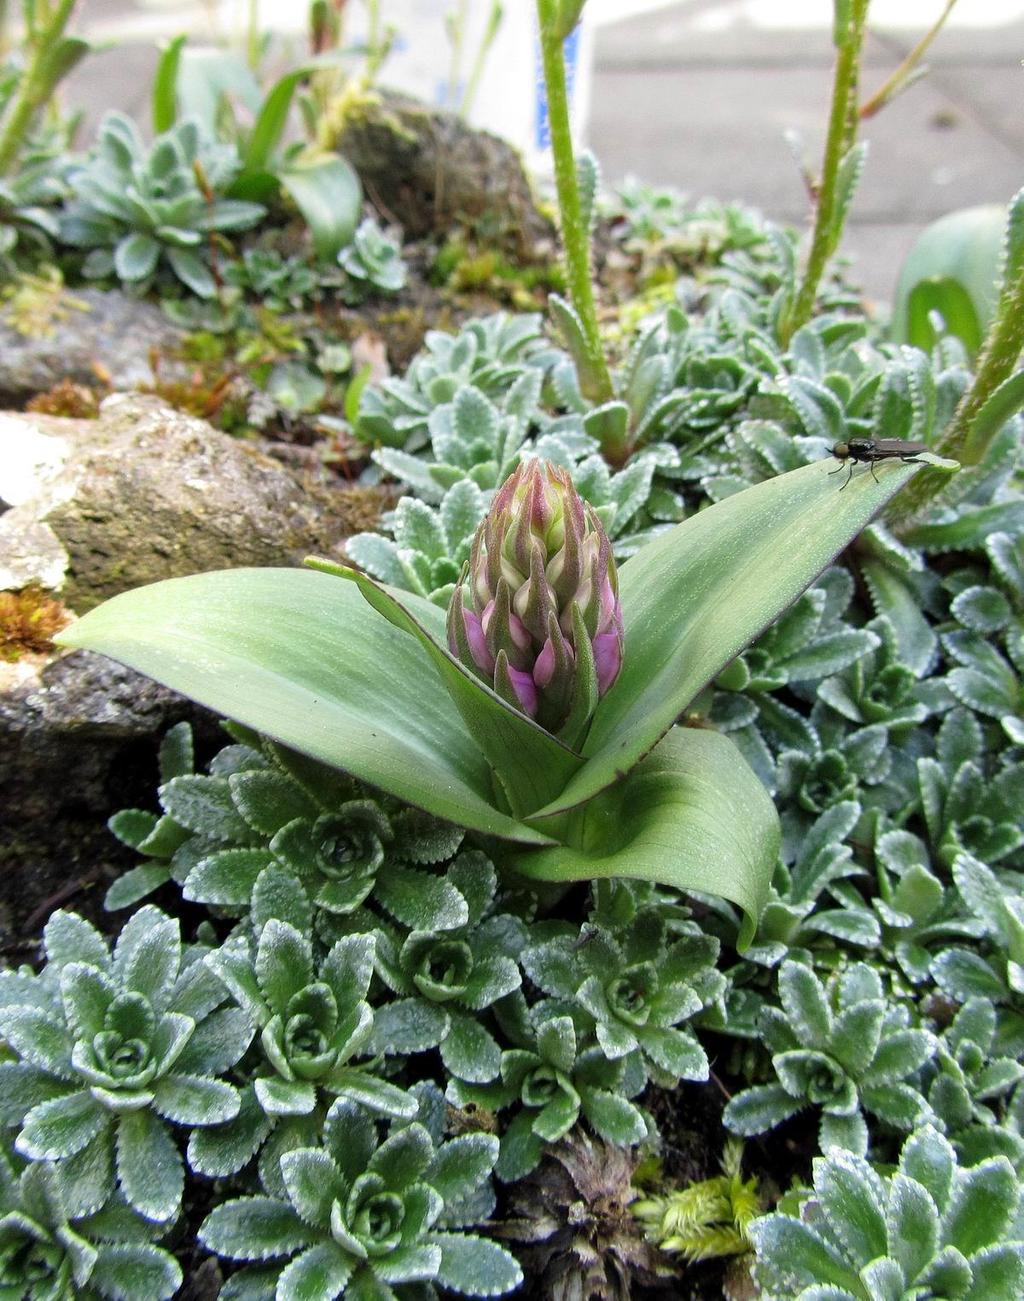 Dactylorhiza purpurella growing happily through a silver saxifrage in a cement landscaped environment.